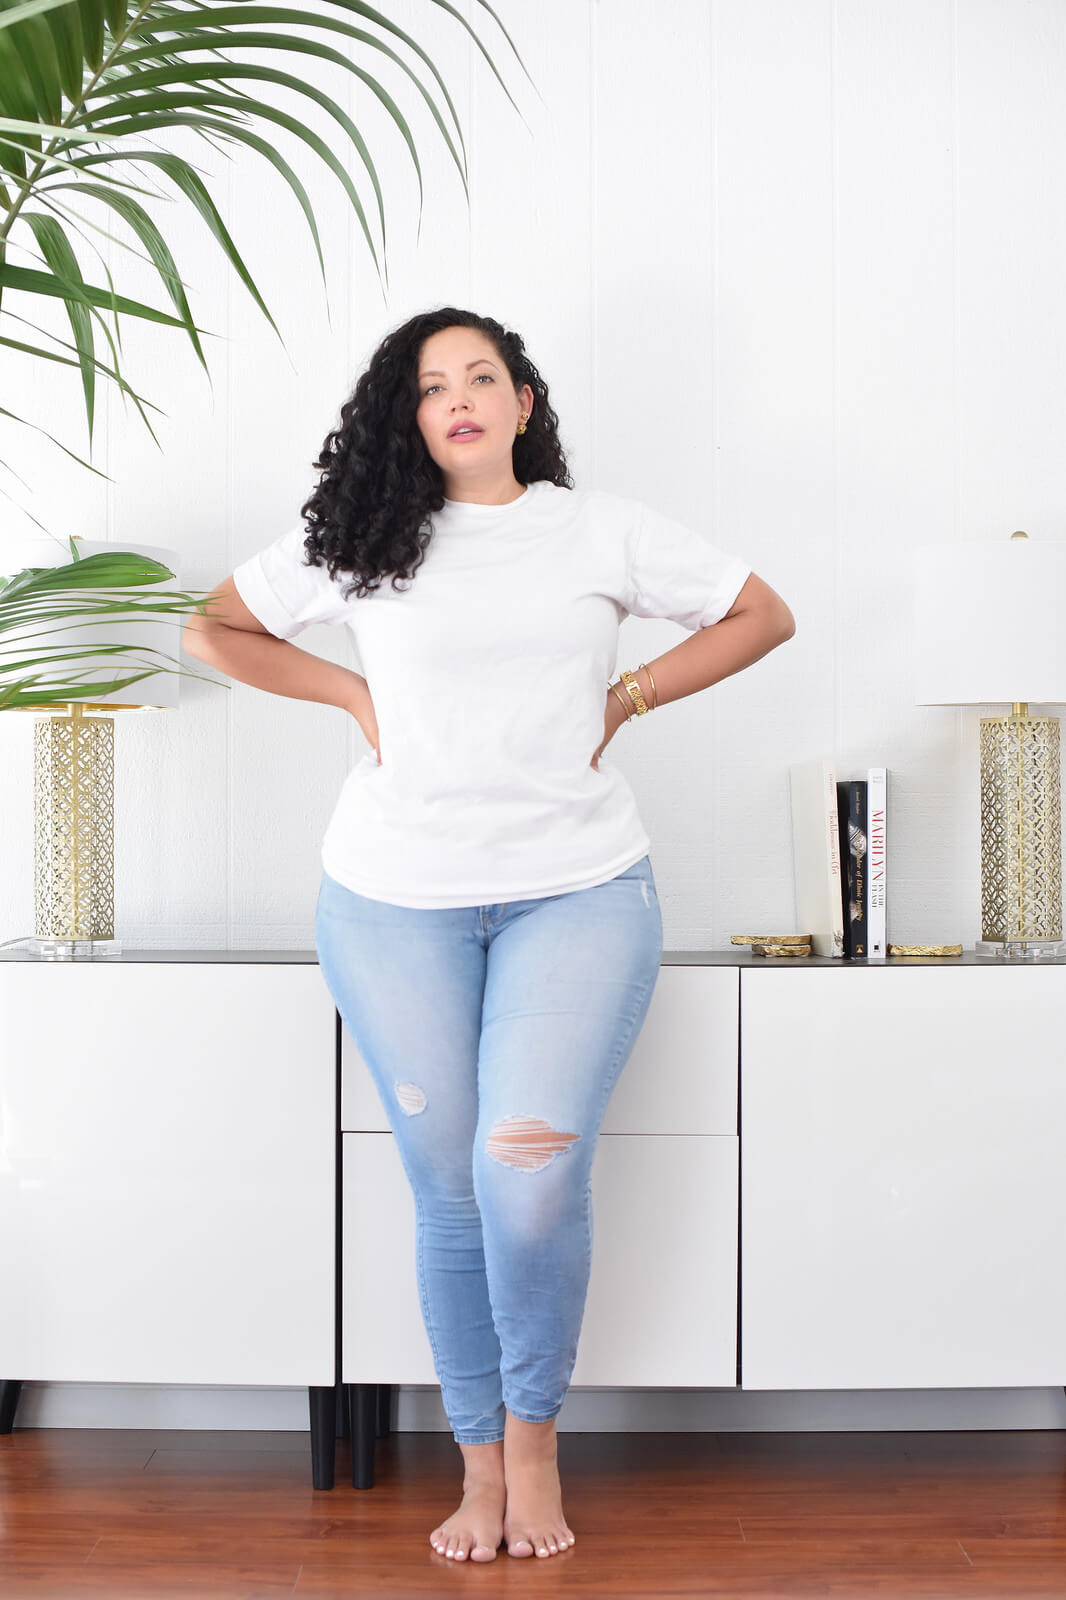 Unconditional Self-Love and Beauty at Every Size via @GirlWithCurves